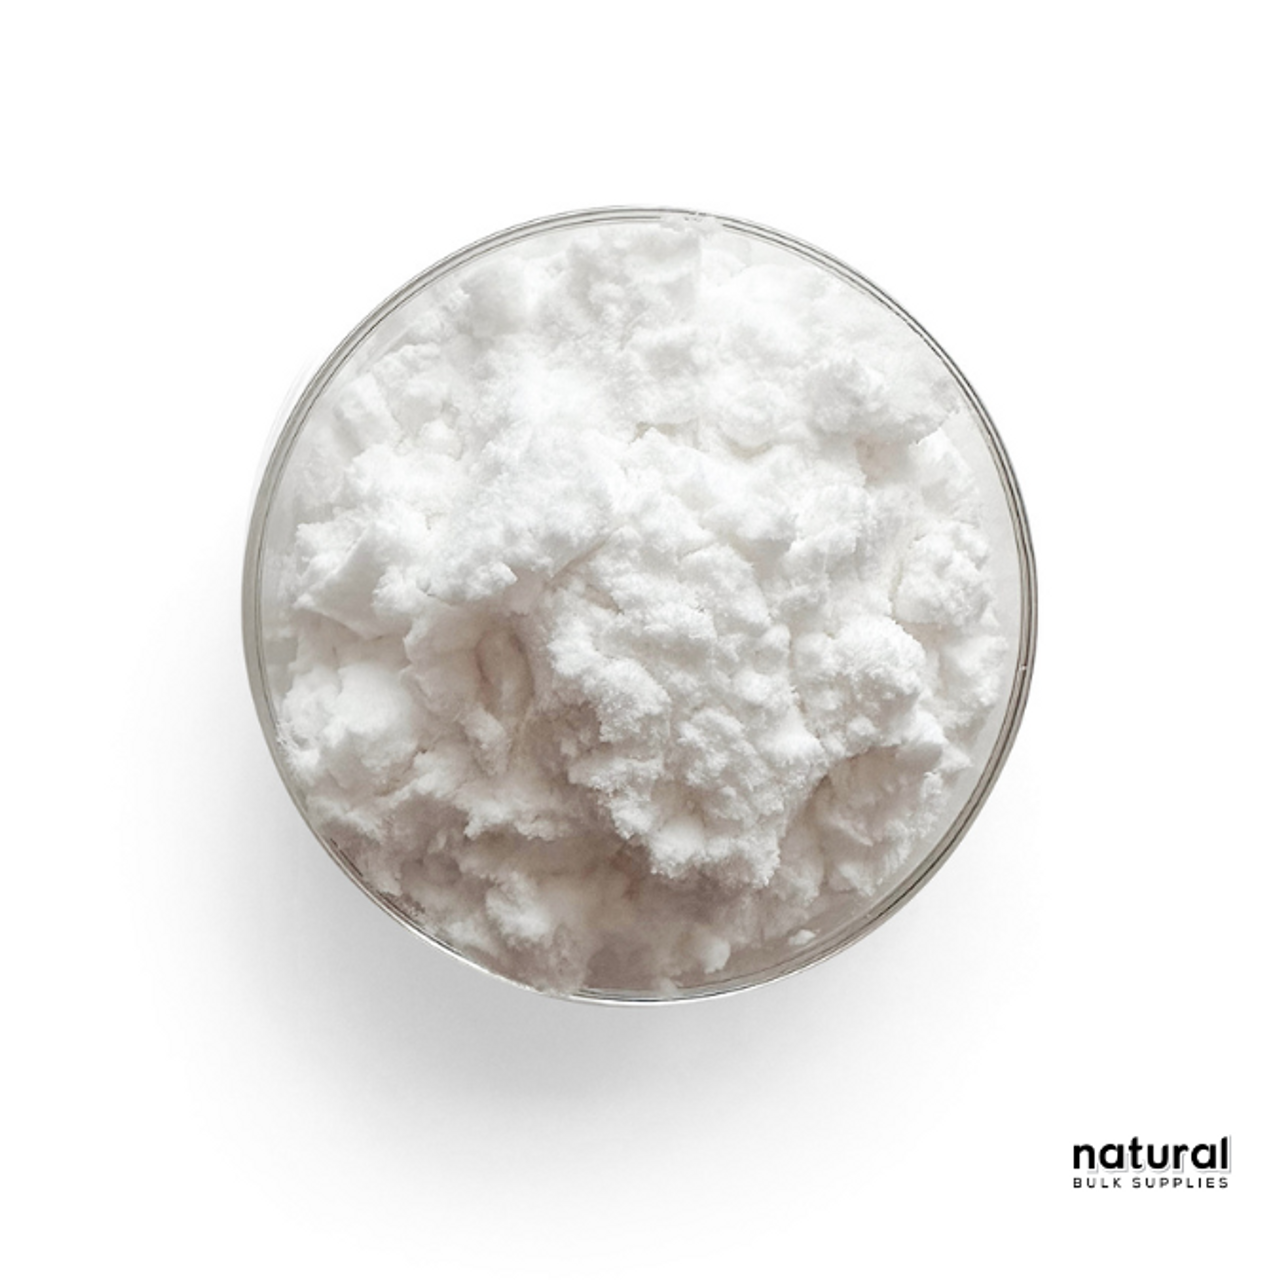 Sodium Coco Sulfate powder for natural focused products